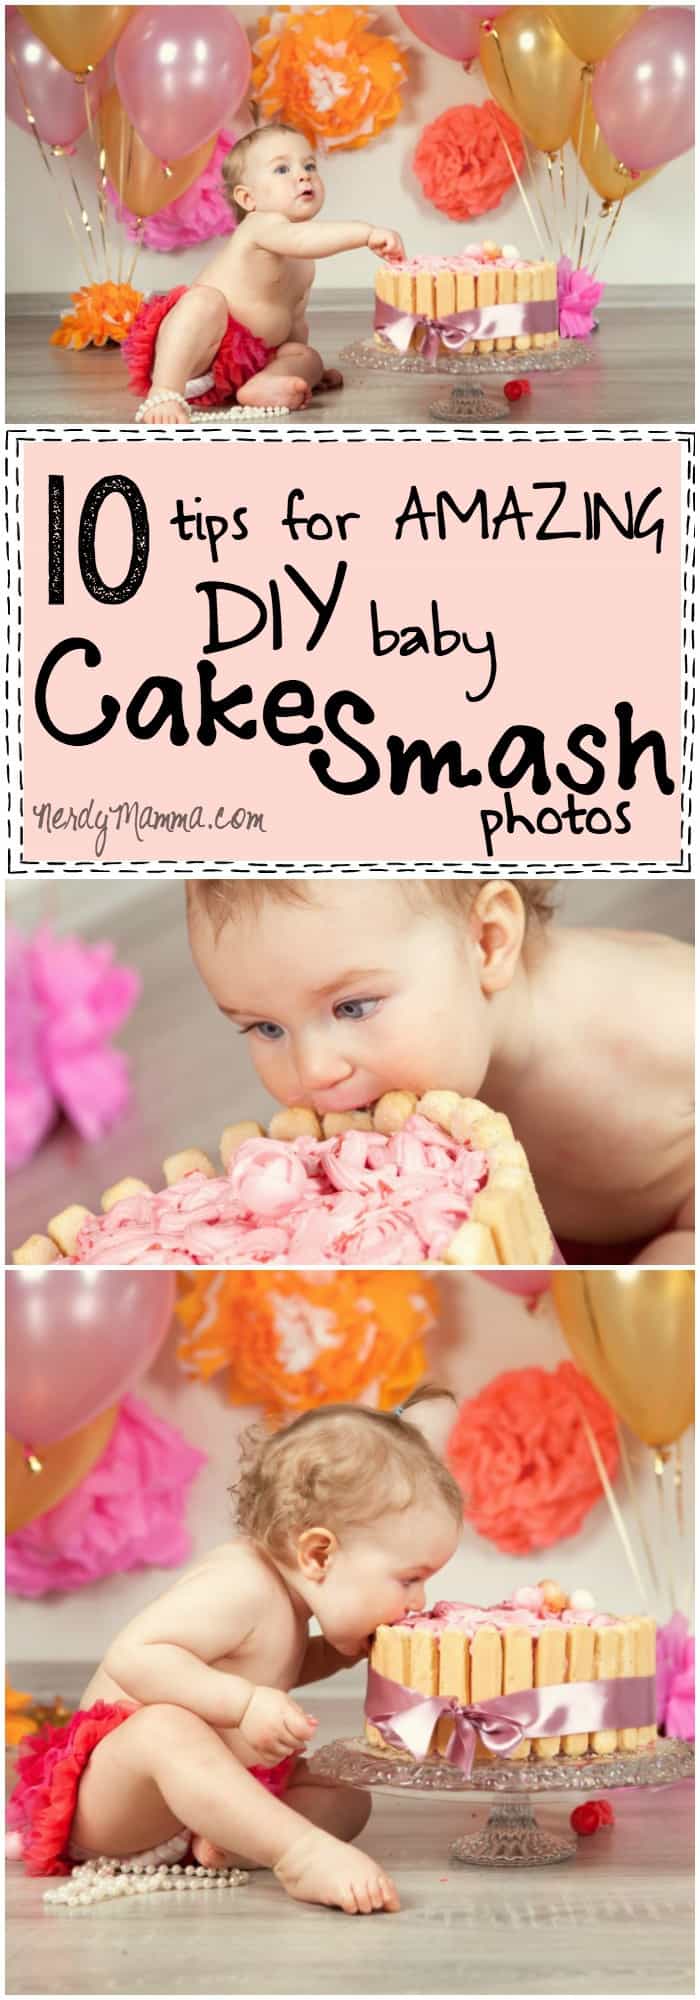 I love these 10 tips for amazing DIY baby cake smash photos...I totally adore how easy she makes it seem!